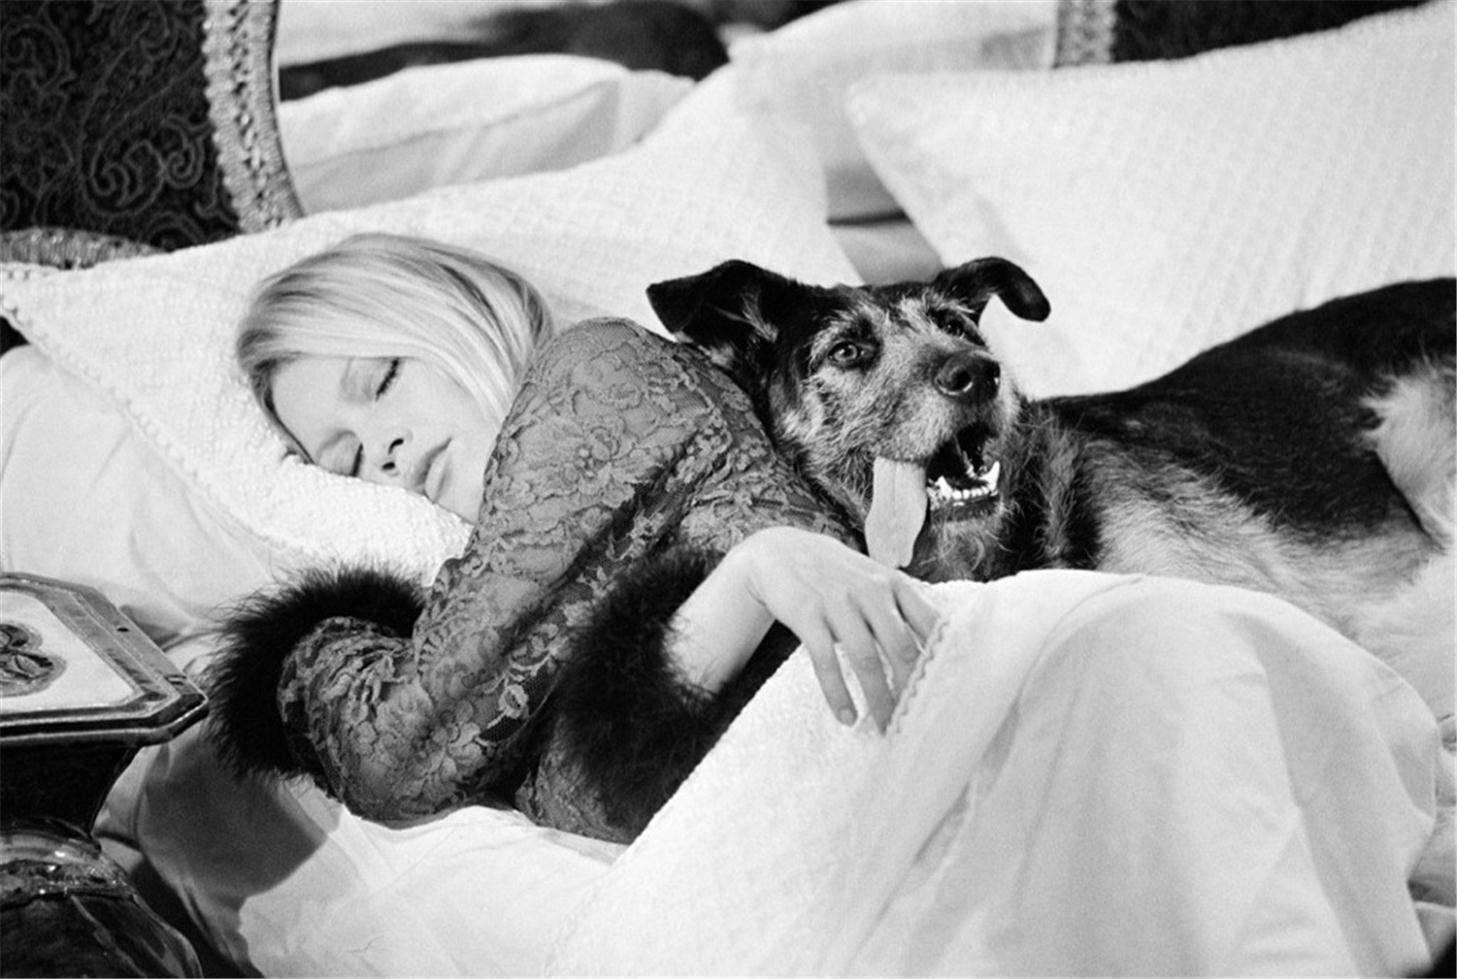 Brigitte Bardot with dog, on set of Les Novices (Co-signed)
1970 (printed later)
Silver Gelatin Print
16 x 20 inches 
Signed and dated by the artists and comes with certificate of authenticity from the Terry O'Neill estate

French actress Brigitte